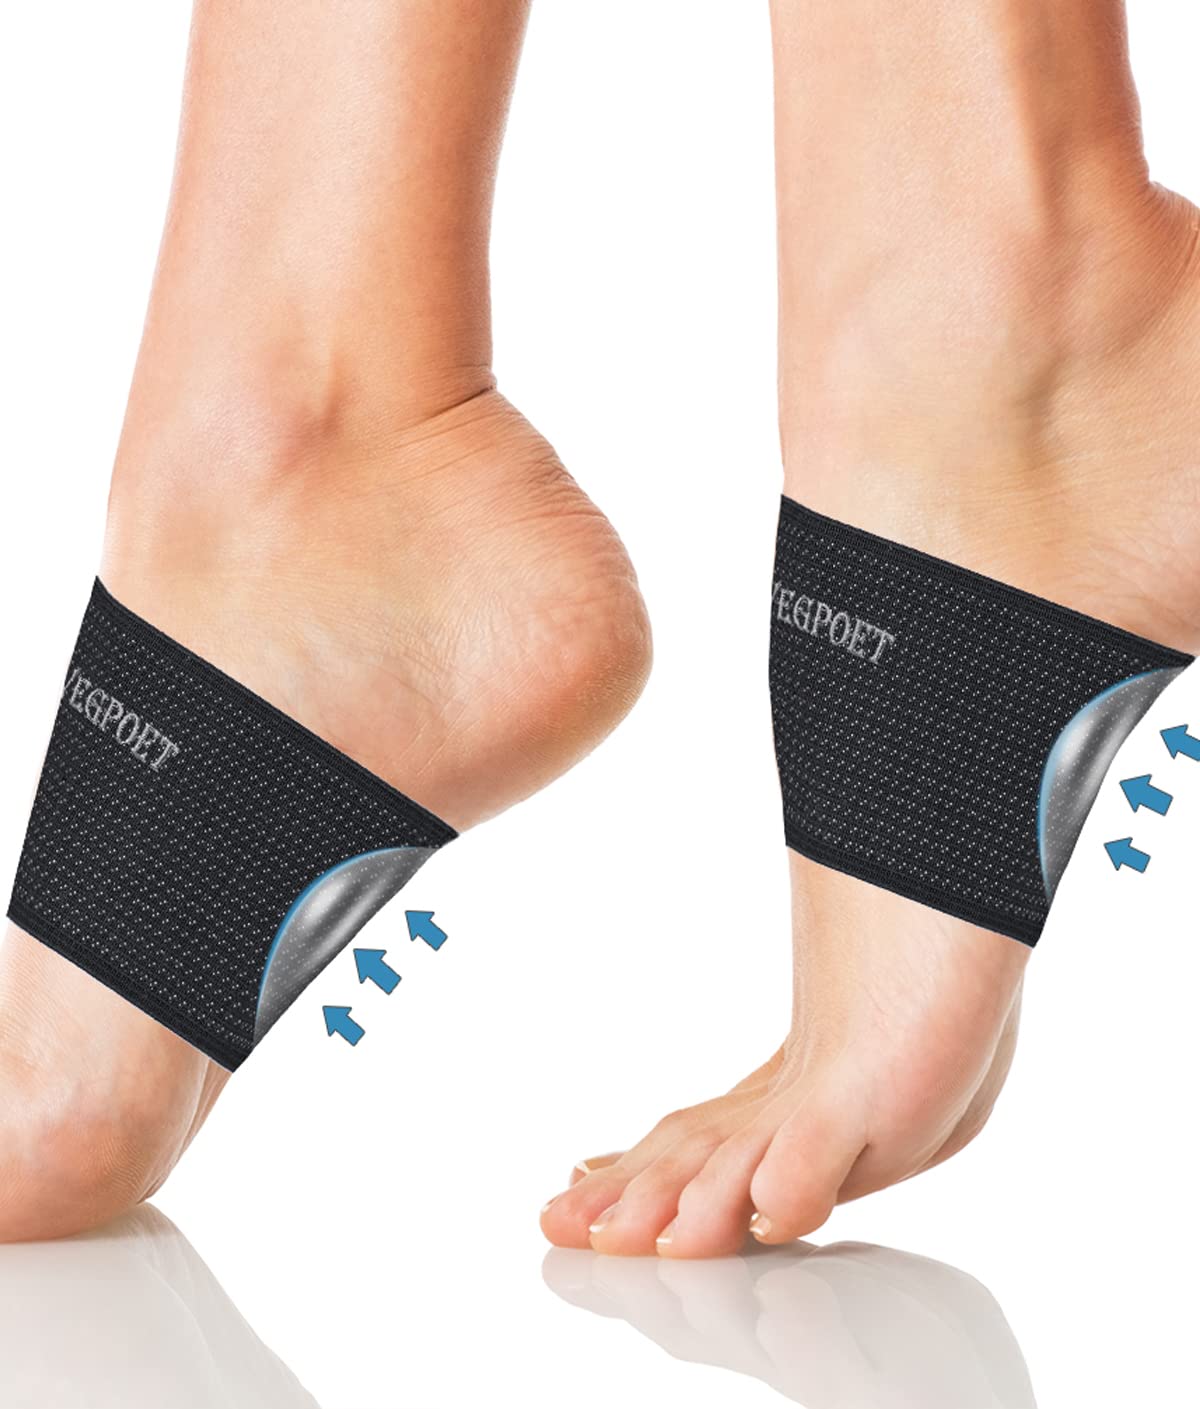 Copper Arch Support Relief Plus - Vegpoet Plantar Fasciitis Relief Arch  Supports Bands/Sleeves with Gel Pads